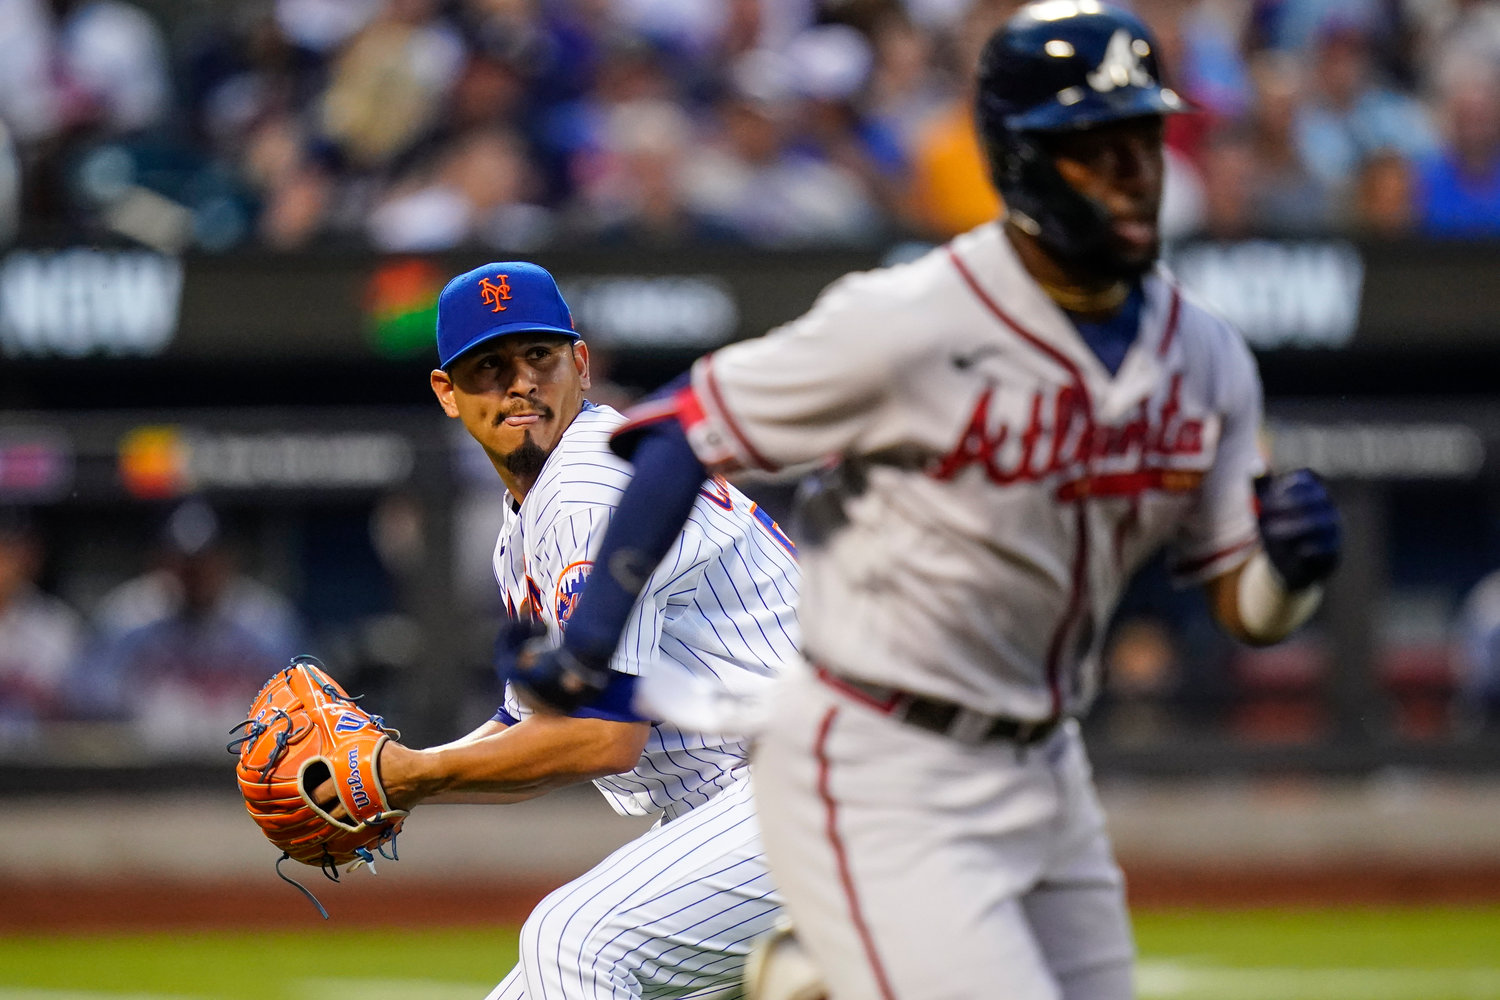 New York Mets starting pitcher Carlos Carrasco throws out Atlanta Braves' Michael Harris II at first base during the third inning of a baseball game, Thursday, Aug. 4, 2022, in New York. (AP Photo/Frank Franklin II)